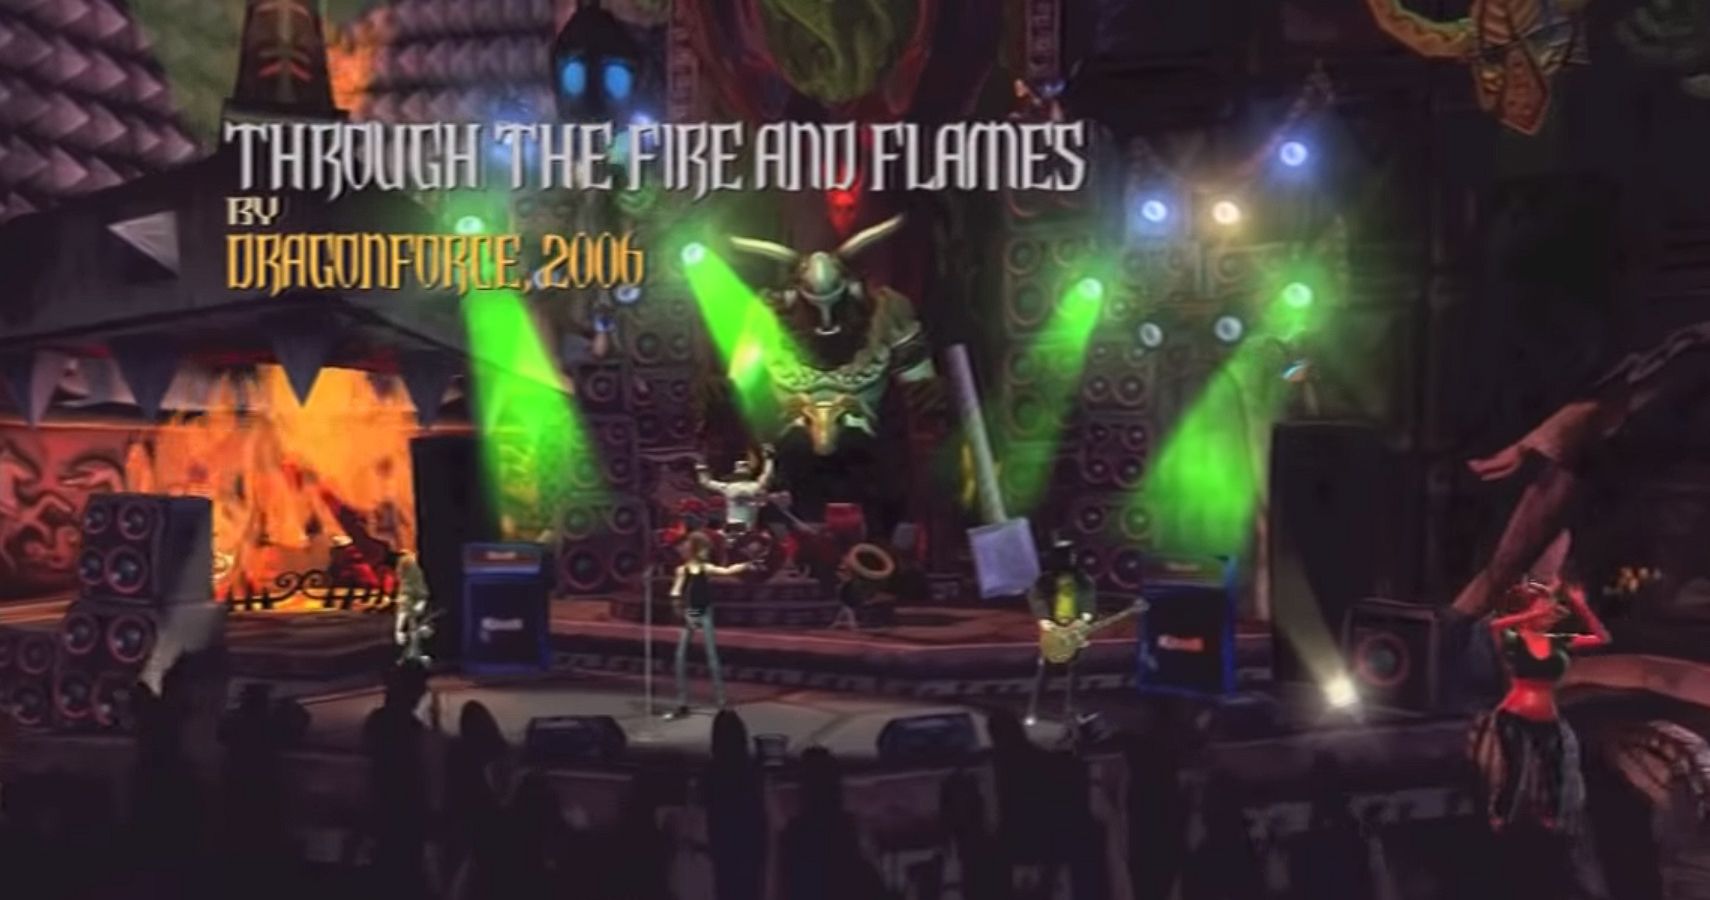 Through the fire and flames guitar hero